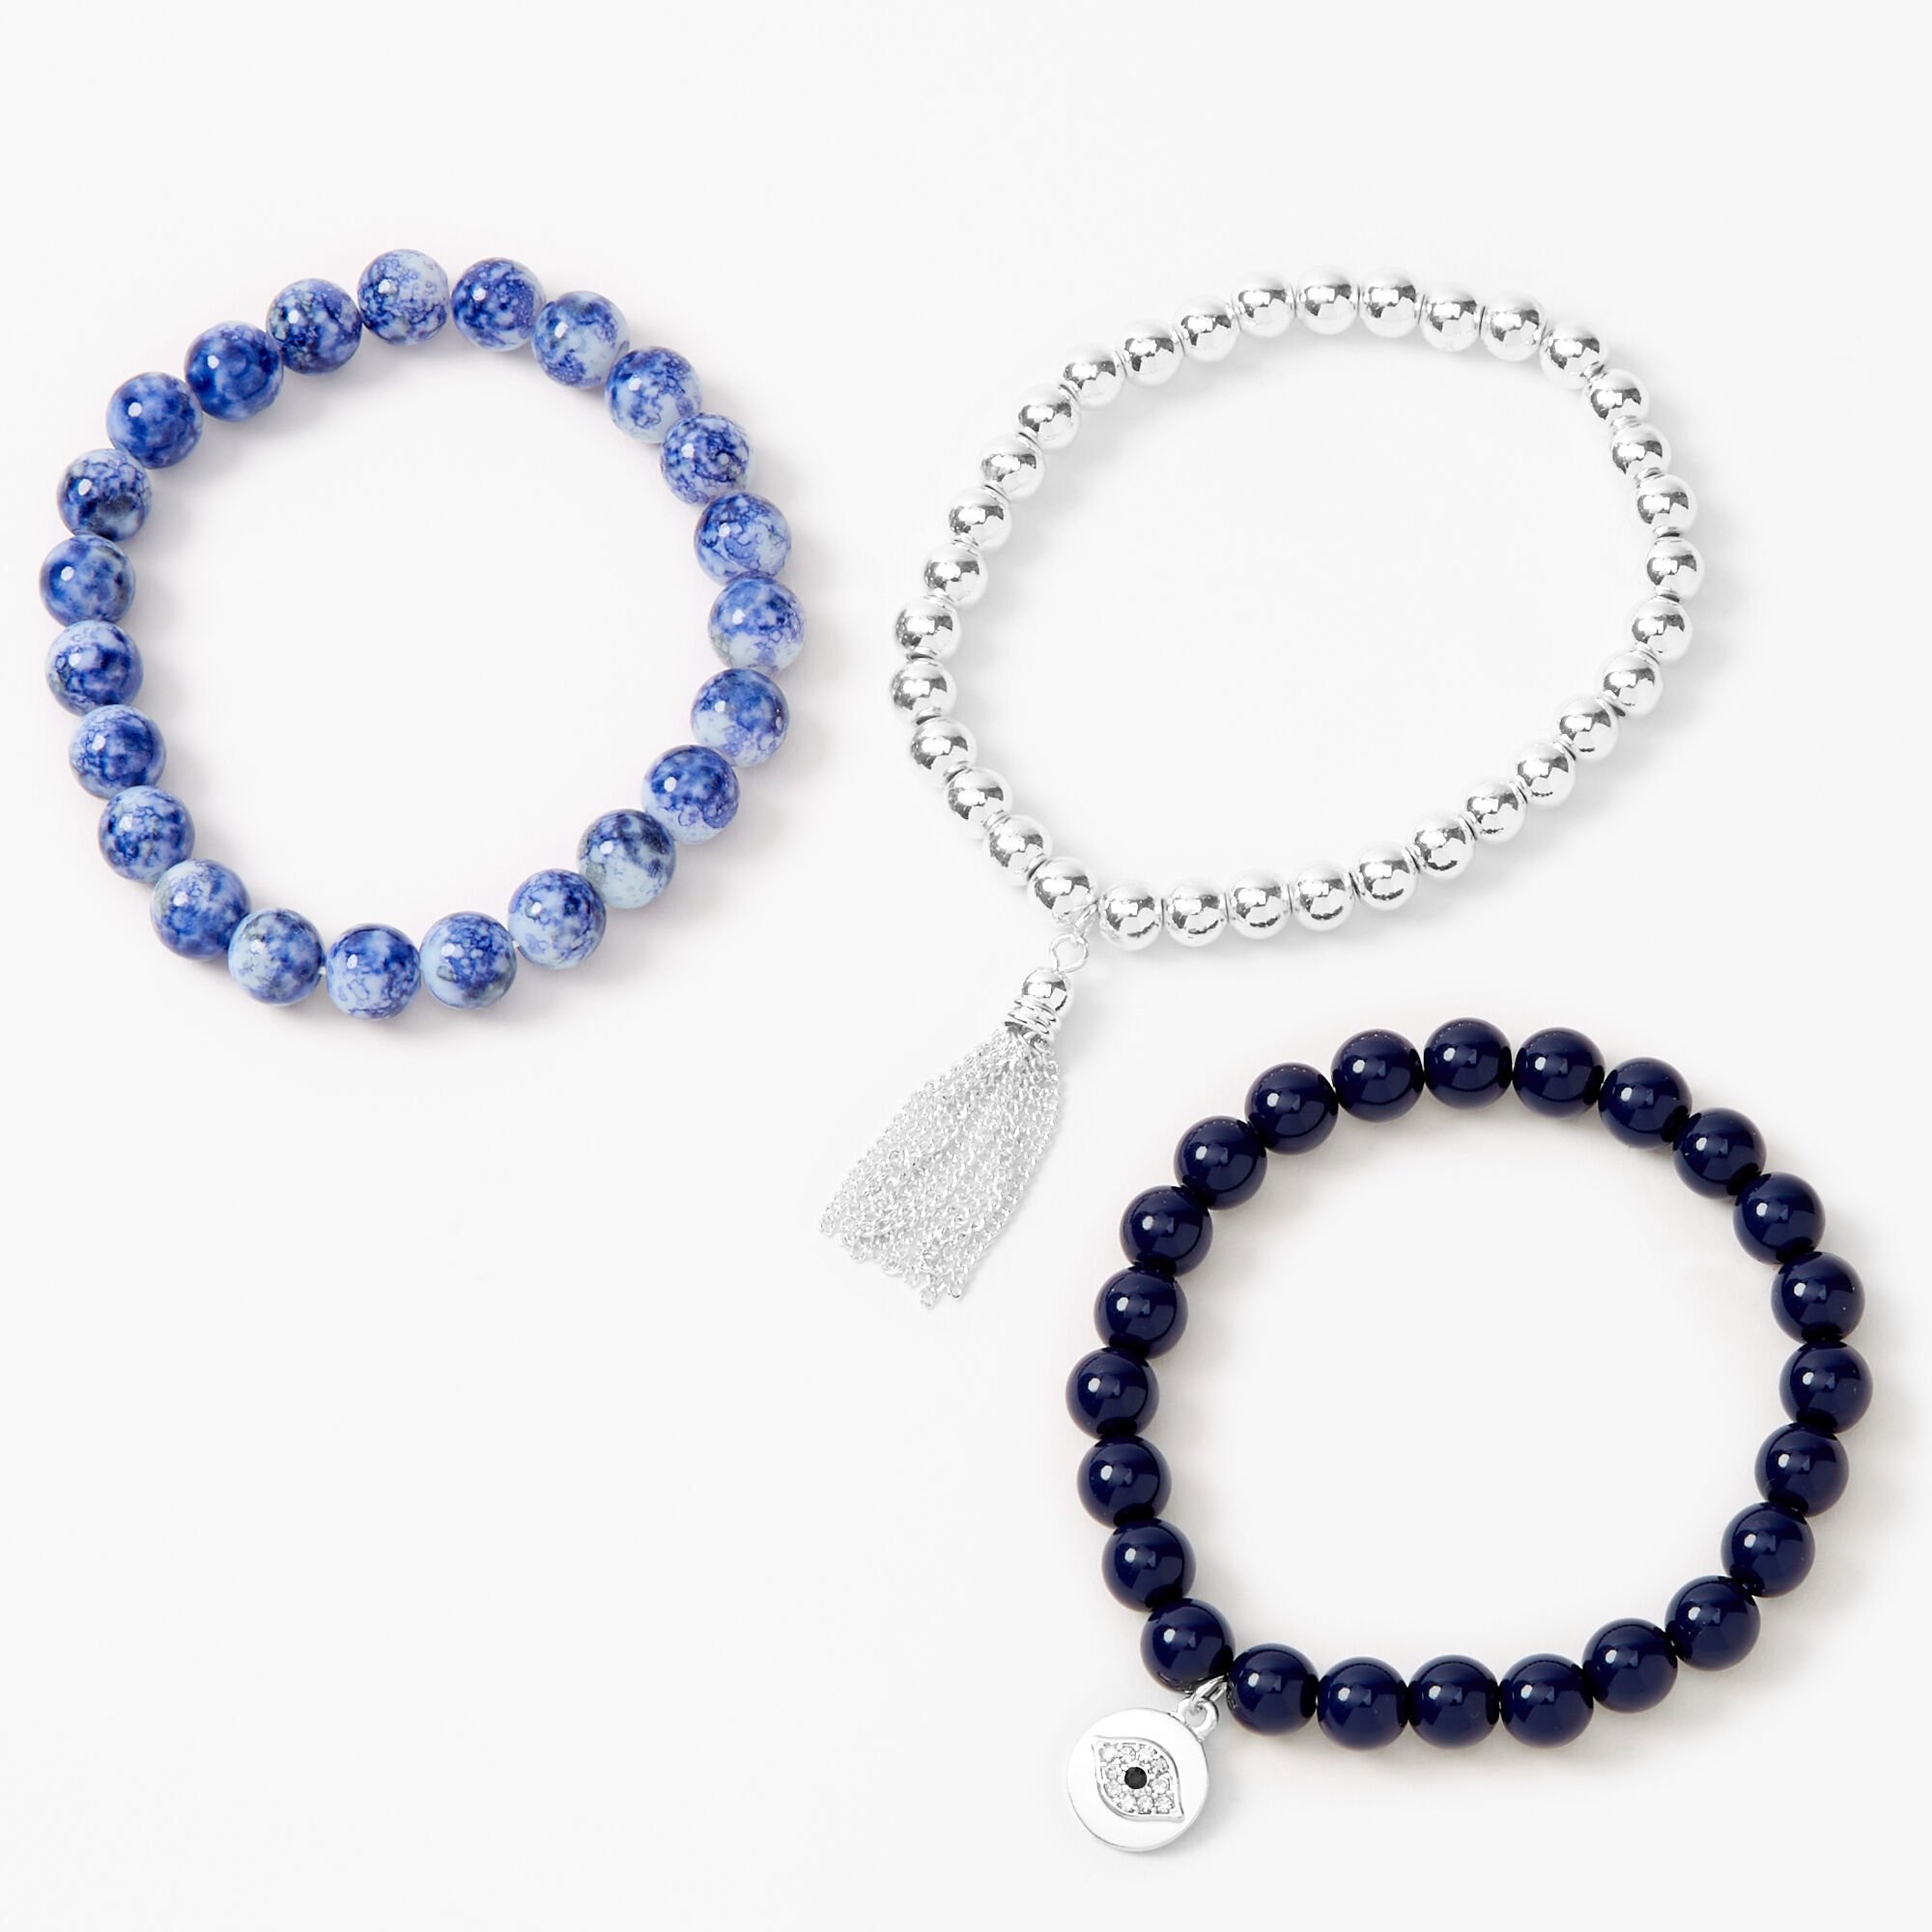 View Claires Evil Eye Marble Beaded Stretch Bracelets 3 Pack Blue information